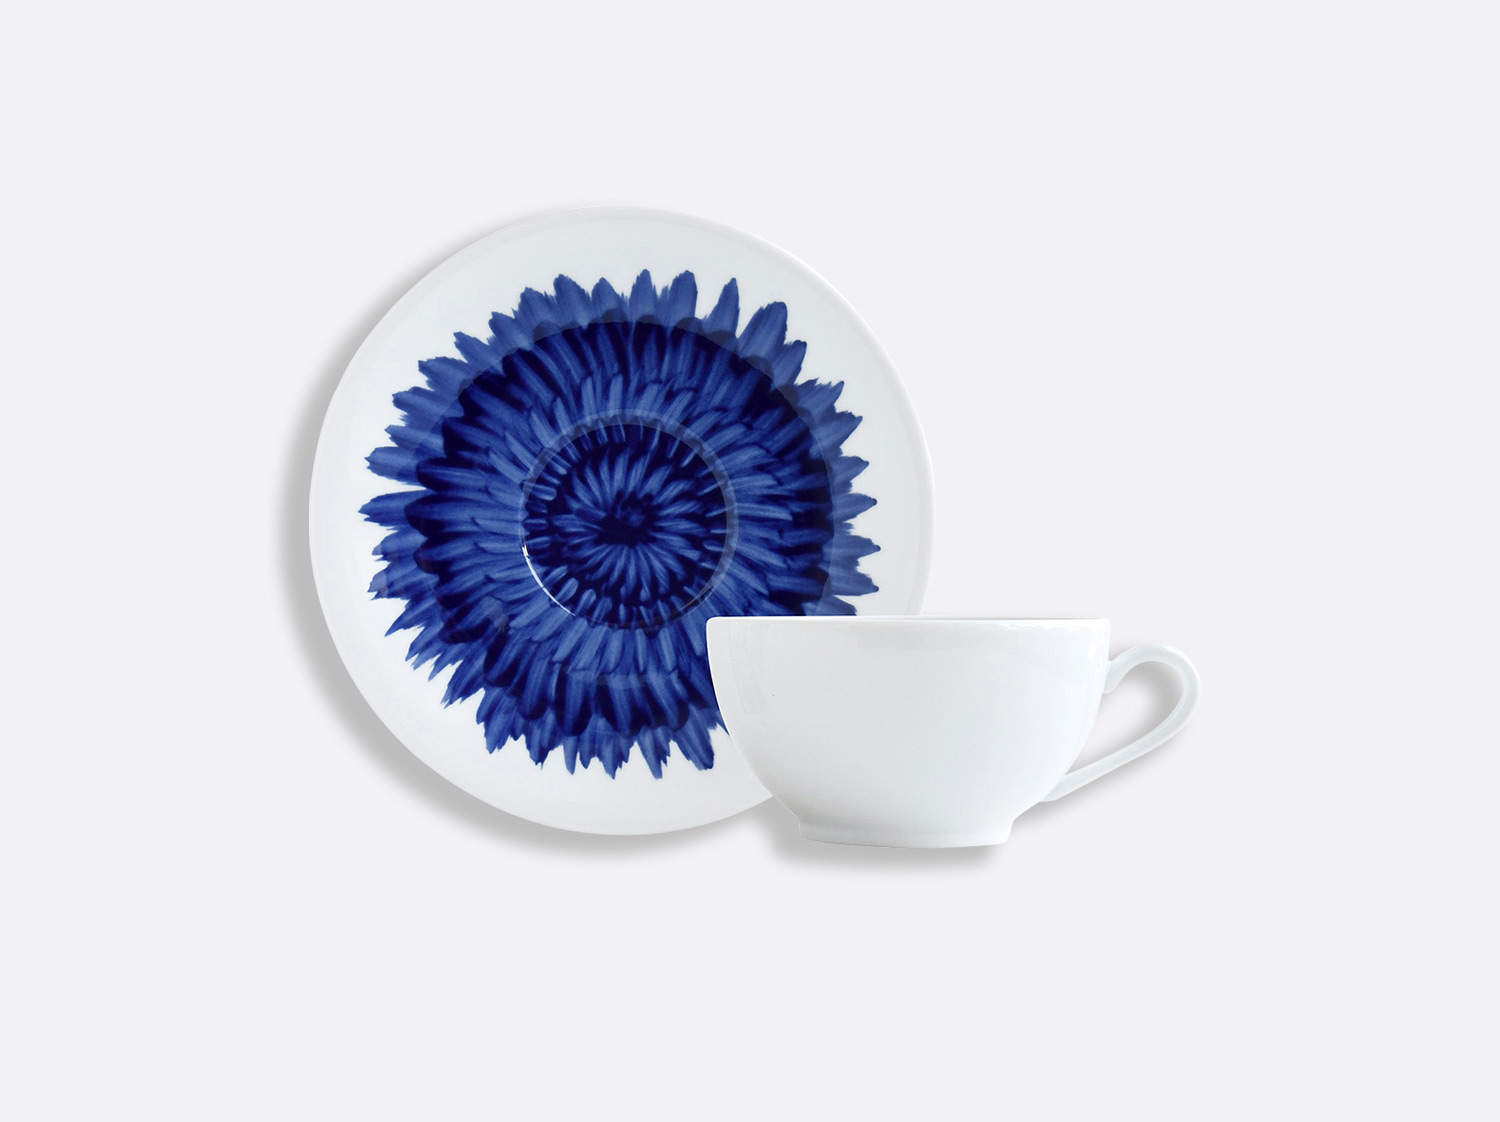 China Breakfast cup and saucer 10 oz of the collection IN BLOOM - Zemer Peled | Bernardaud